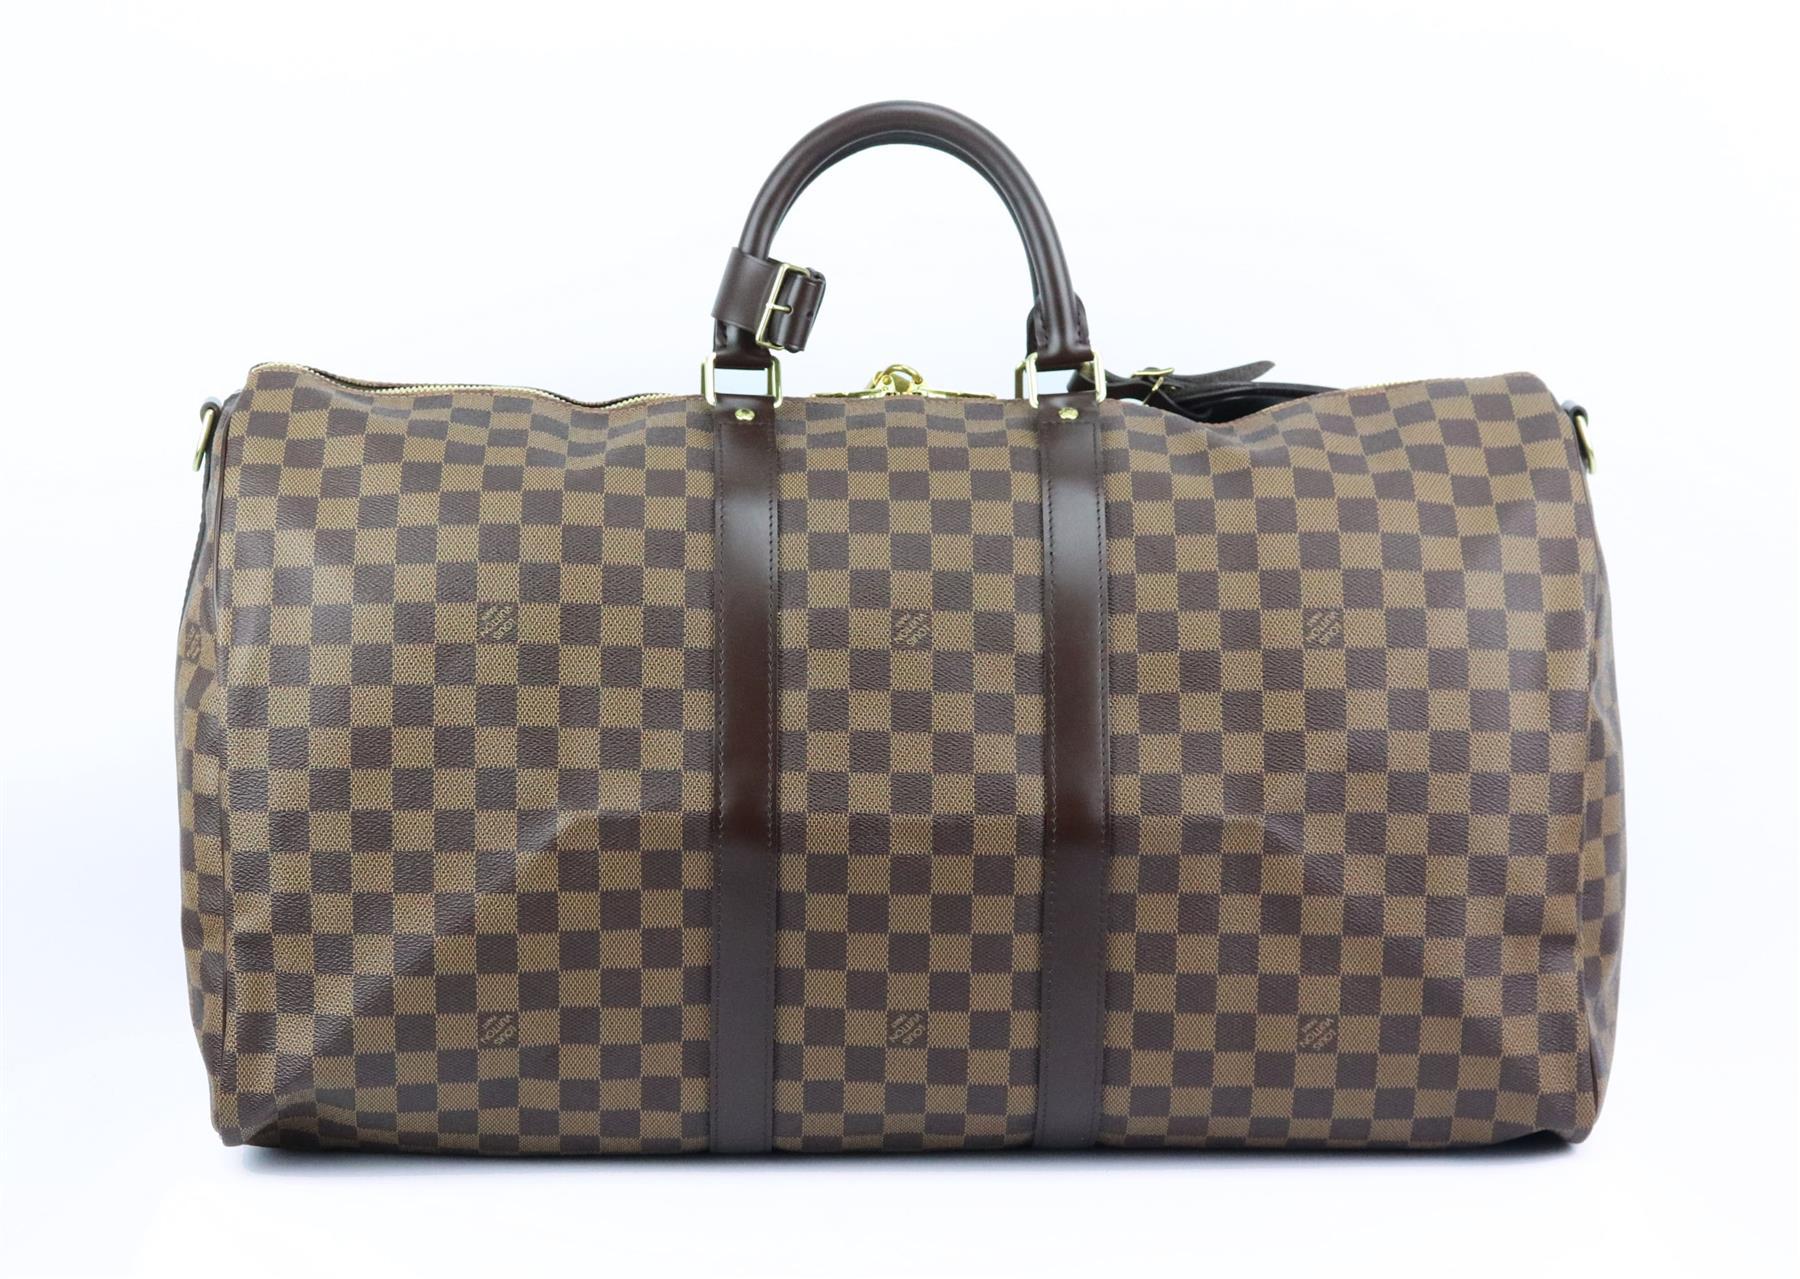 This ‘Keepall Bandoulière 55’ travel bag by Louis Vuitton is inspired by a classic duffle bag re-imagined, crafted from tonal brown ‘Damier Ebene’ coated canvas and lined in brown canvas with brown leather handles and shoulder strap and personalised